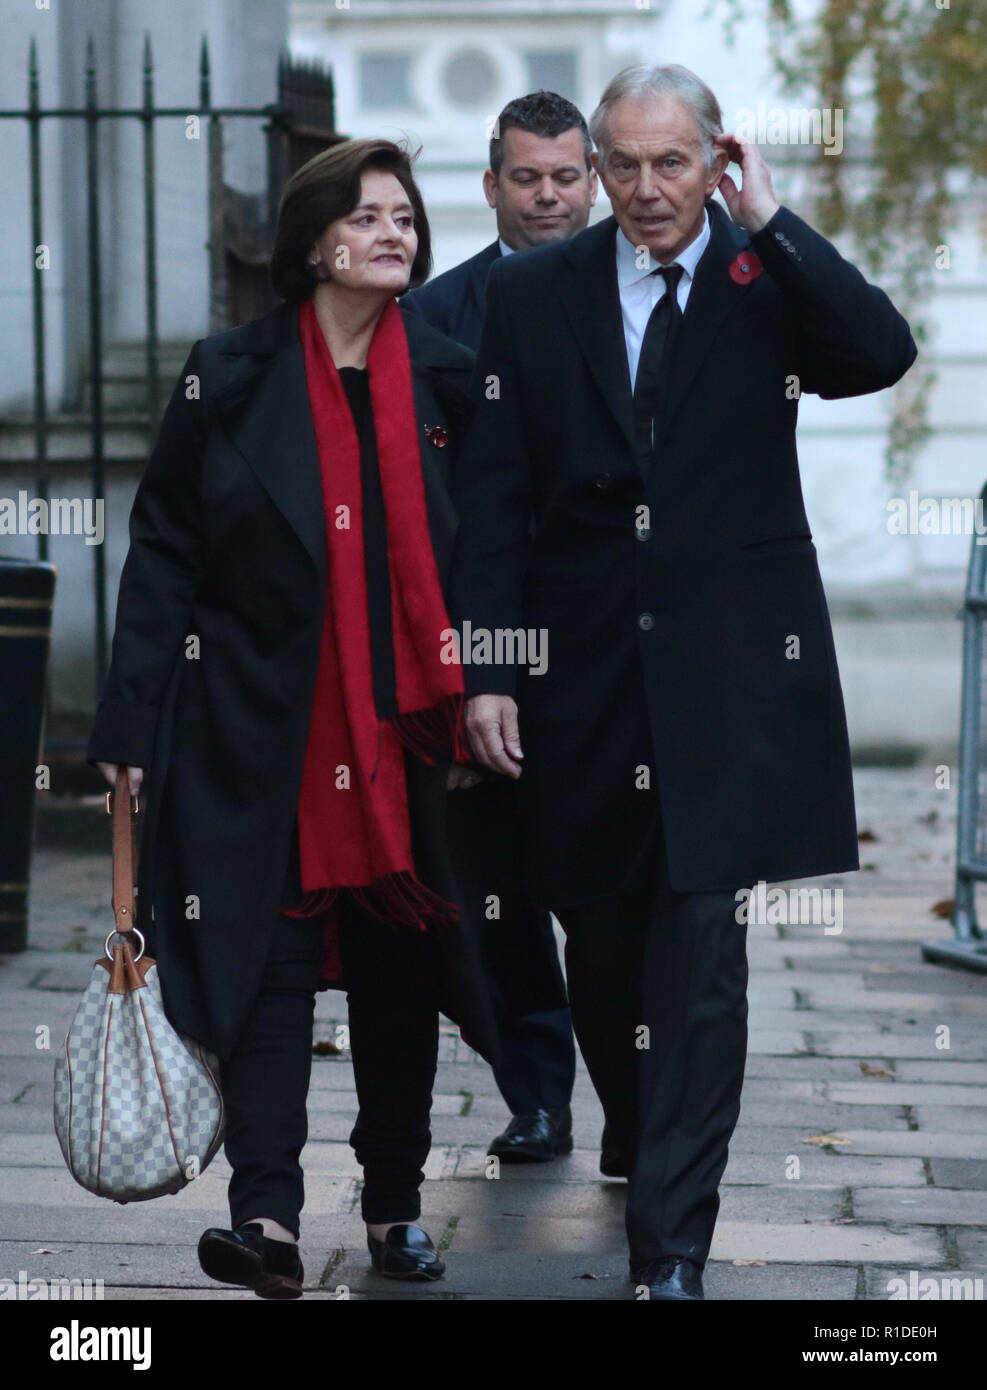 Tony Blair, Former Prime Minister, and wife Cherie, in Downing Street on the way to the Remembrance Sunday ceremony at the Cenotaph in Whitehall. Today marks 100 years since the end of the First World War. Remembrance Sunday, London, on November 11, 2018. Stock Photo